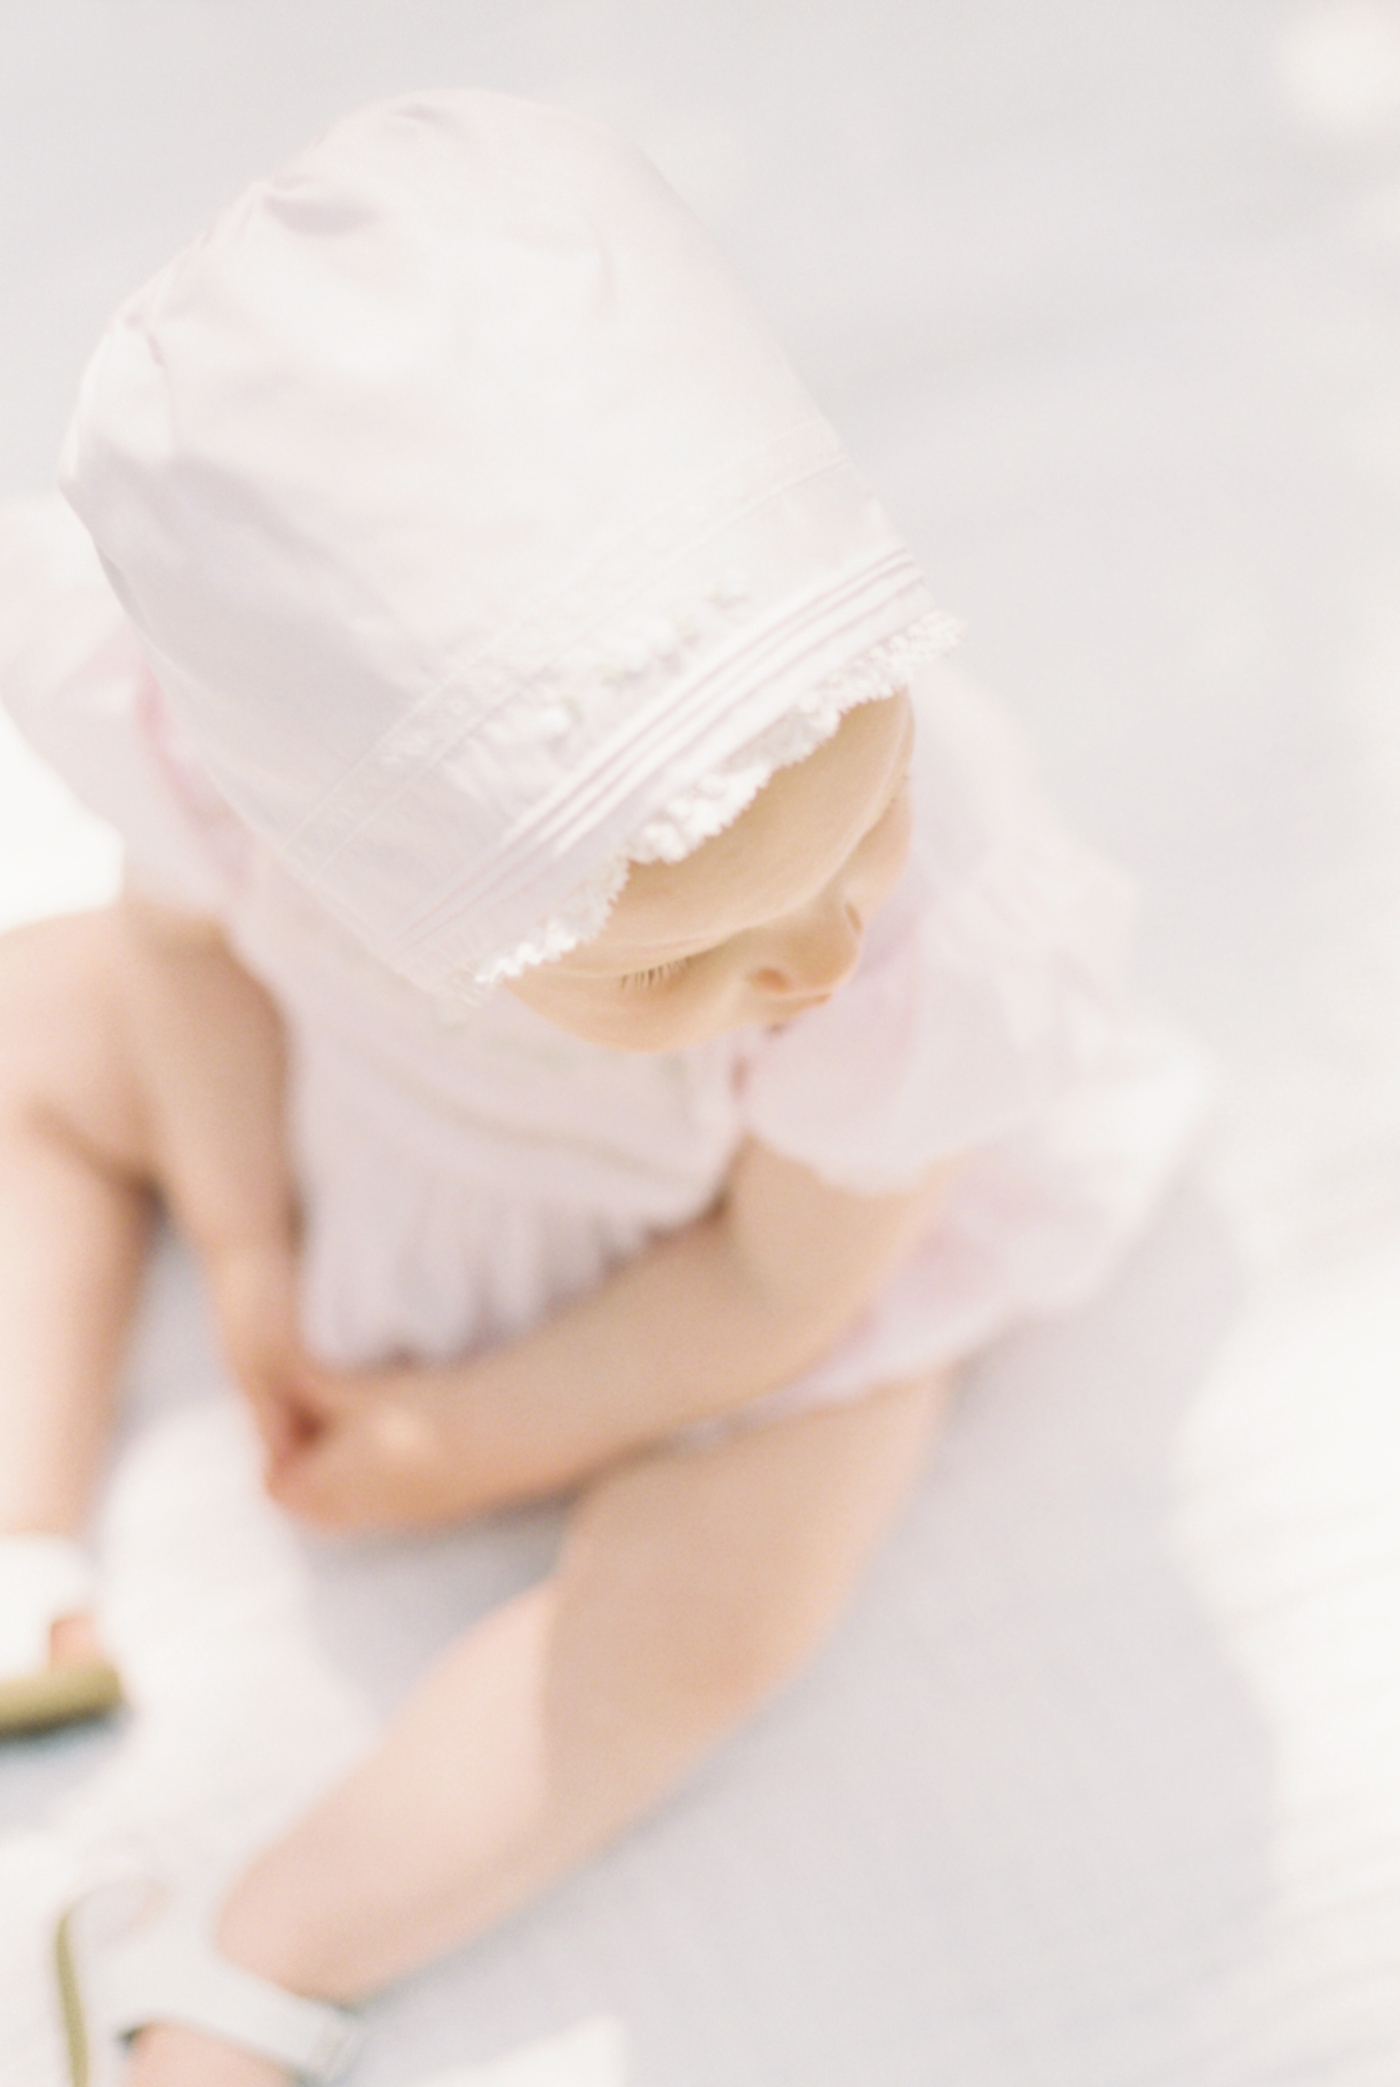 Details of baby's pink bonnet downtown charleston | Photo by Caitlyn Motycka Photography.